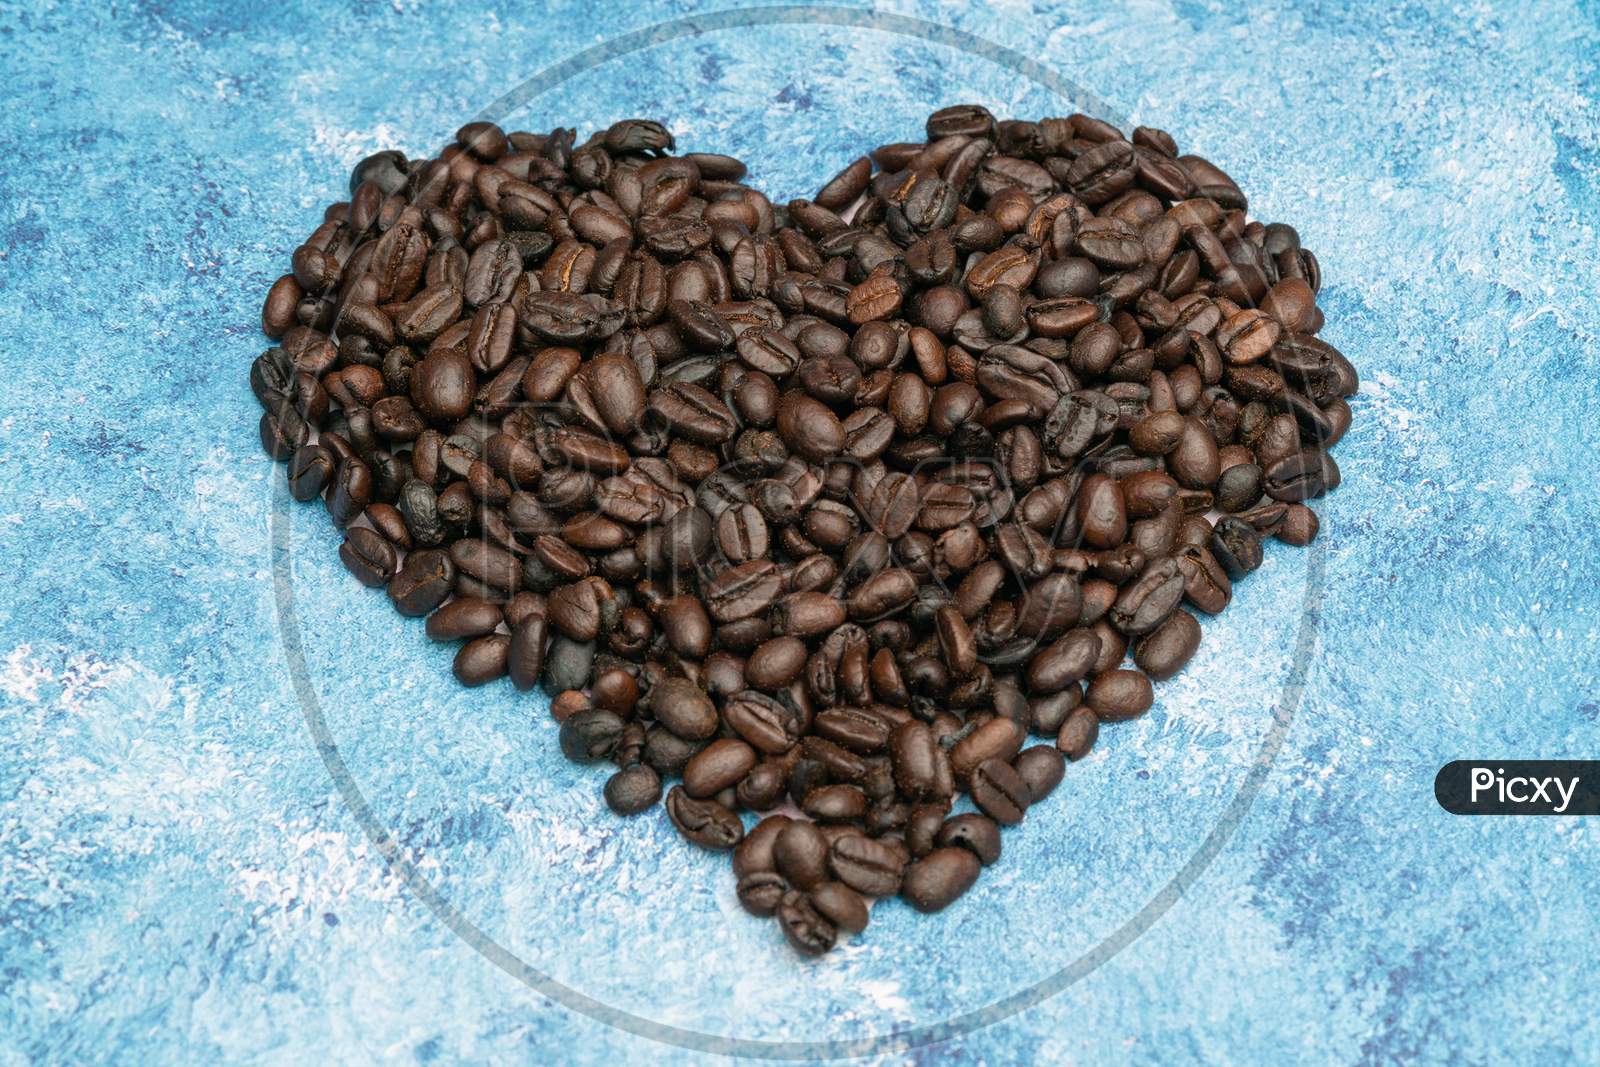 Roasted Coffee Beans, I Love Coffee, Heart With Roasted Coffee Beans.